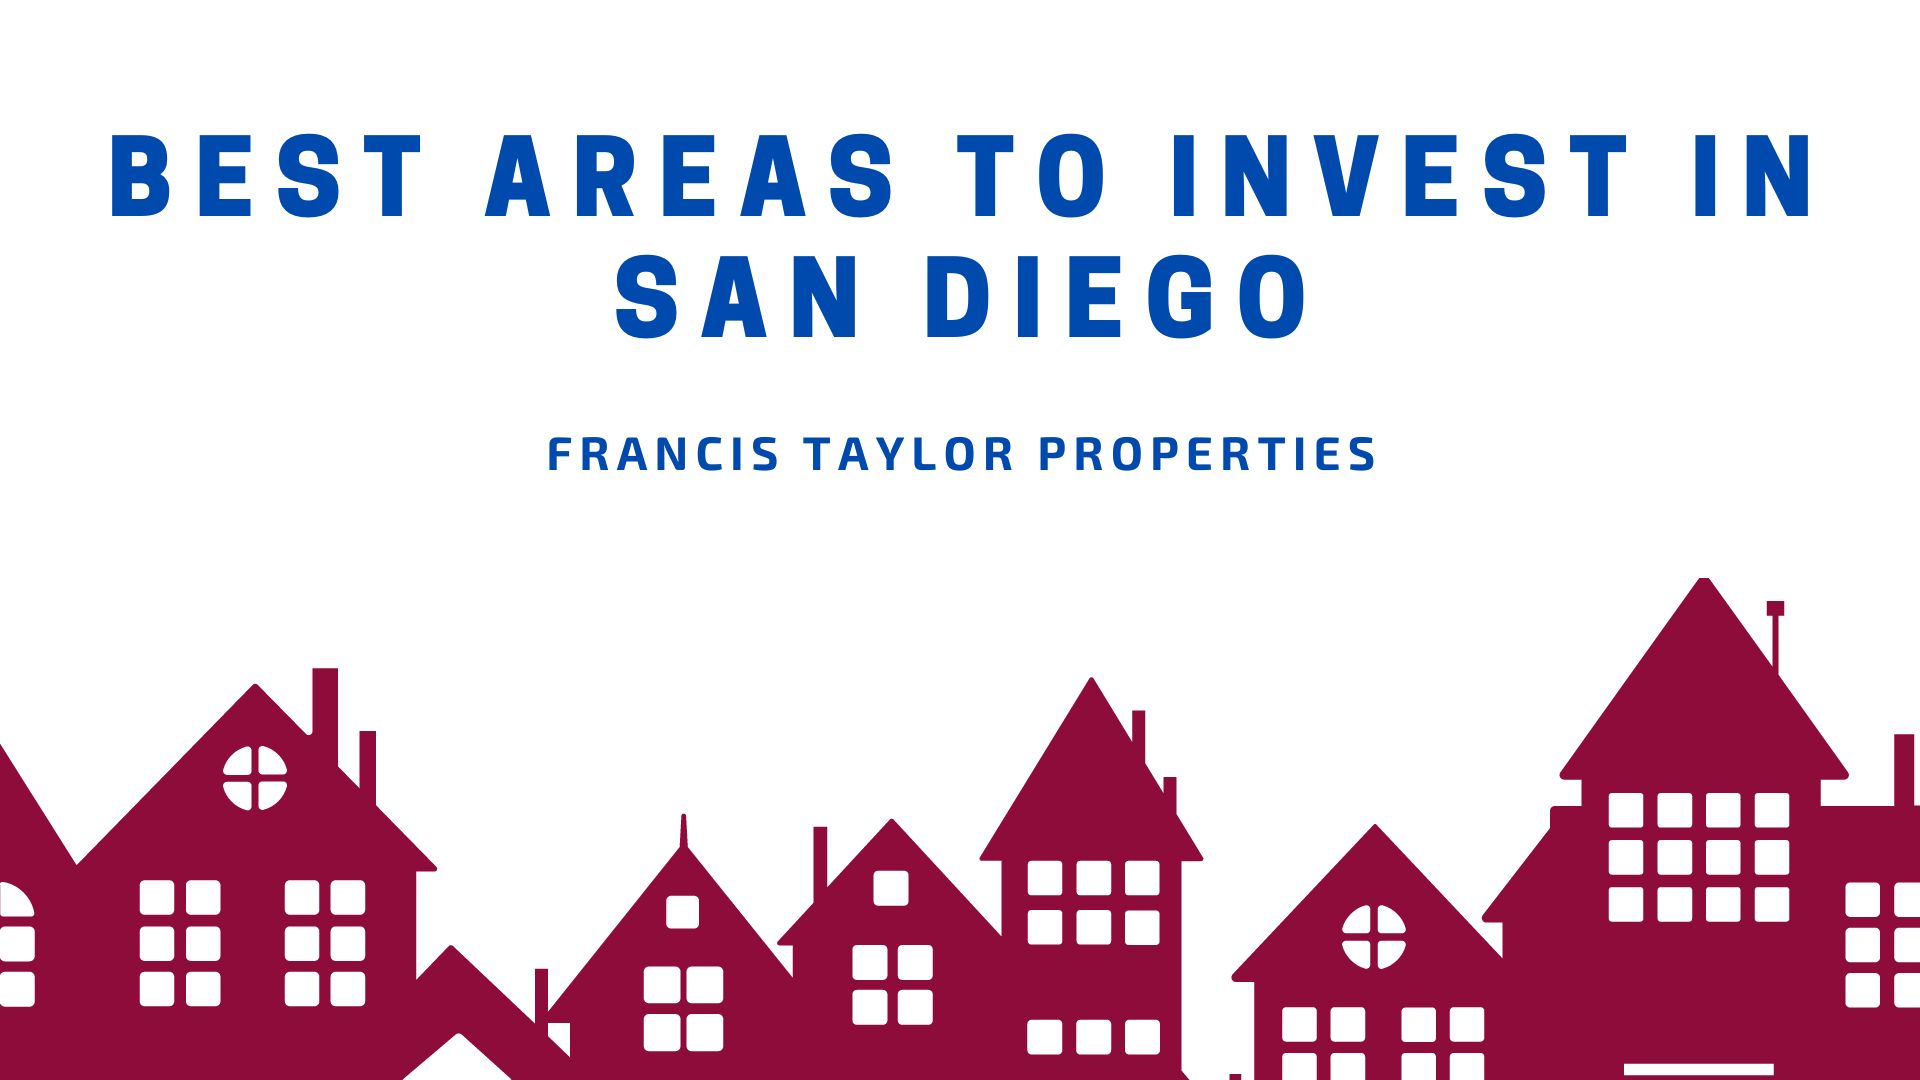 Best Areas to Invest in San Diego